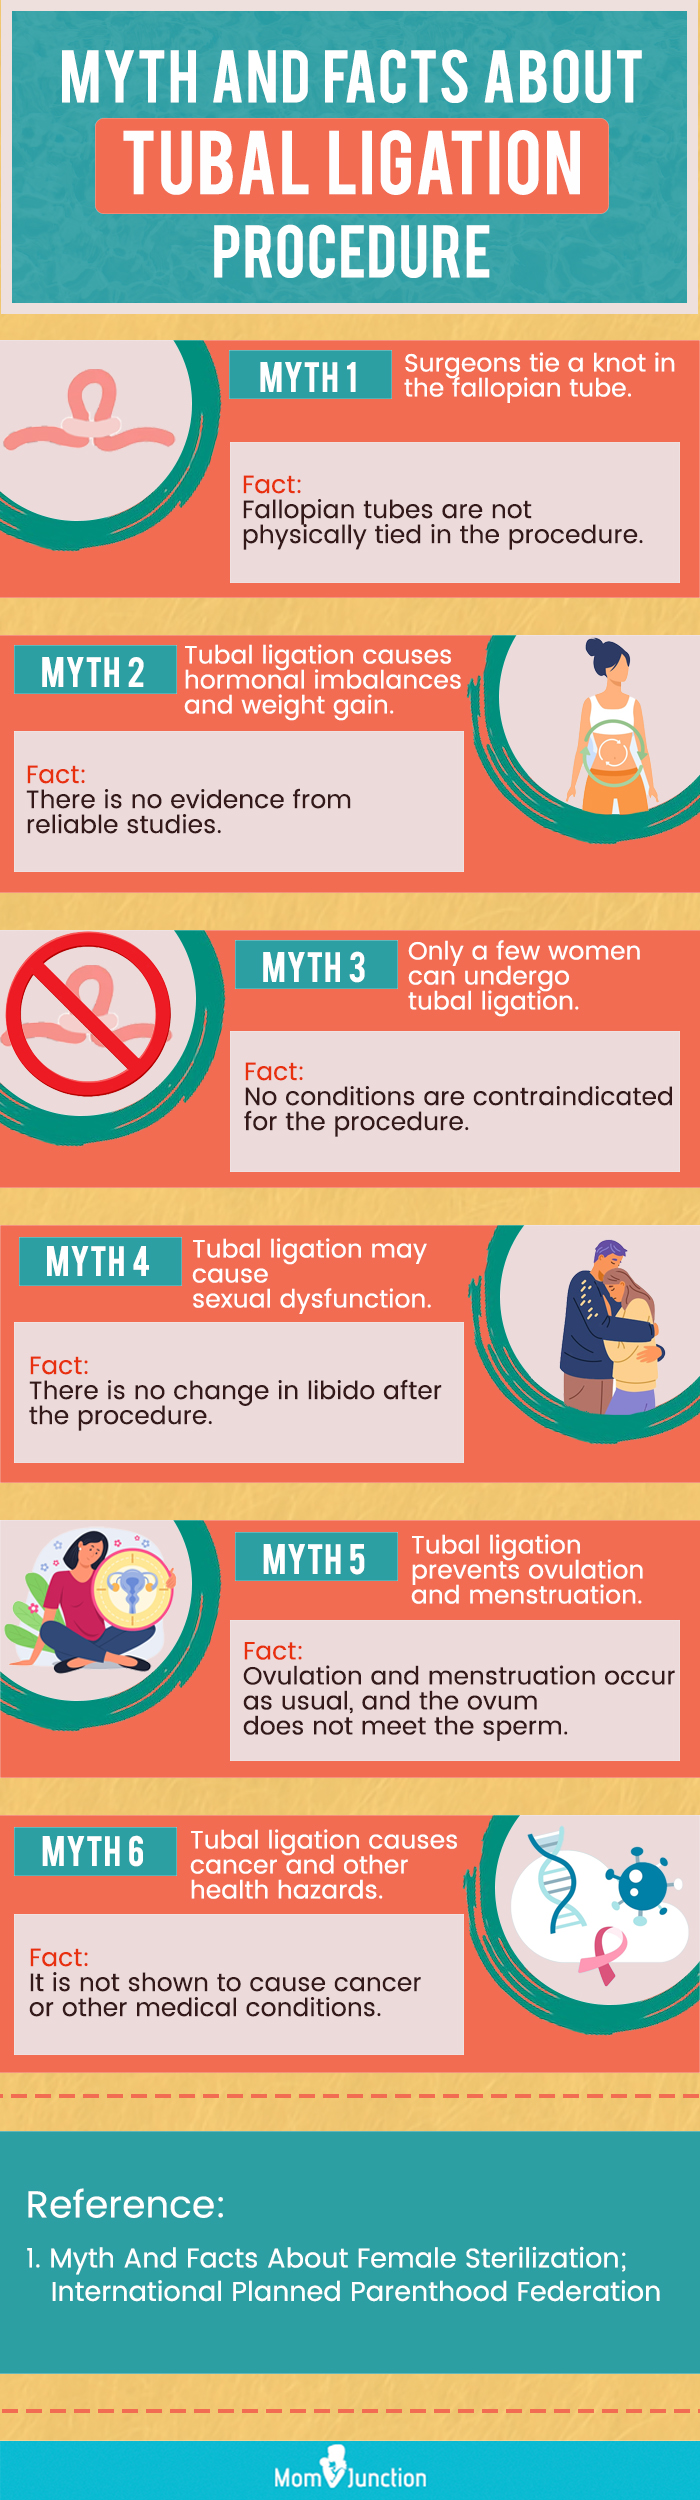 facts about tubal ligation procedure [infographic]